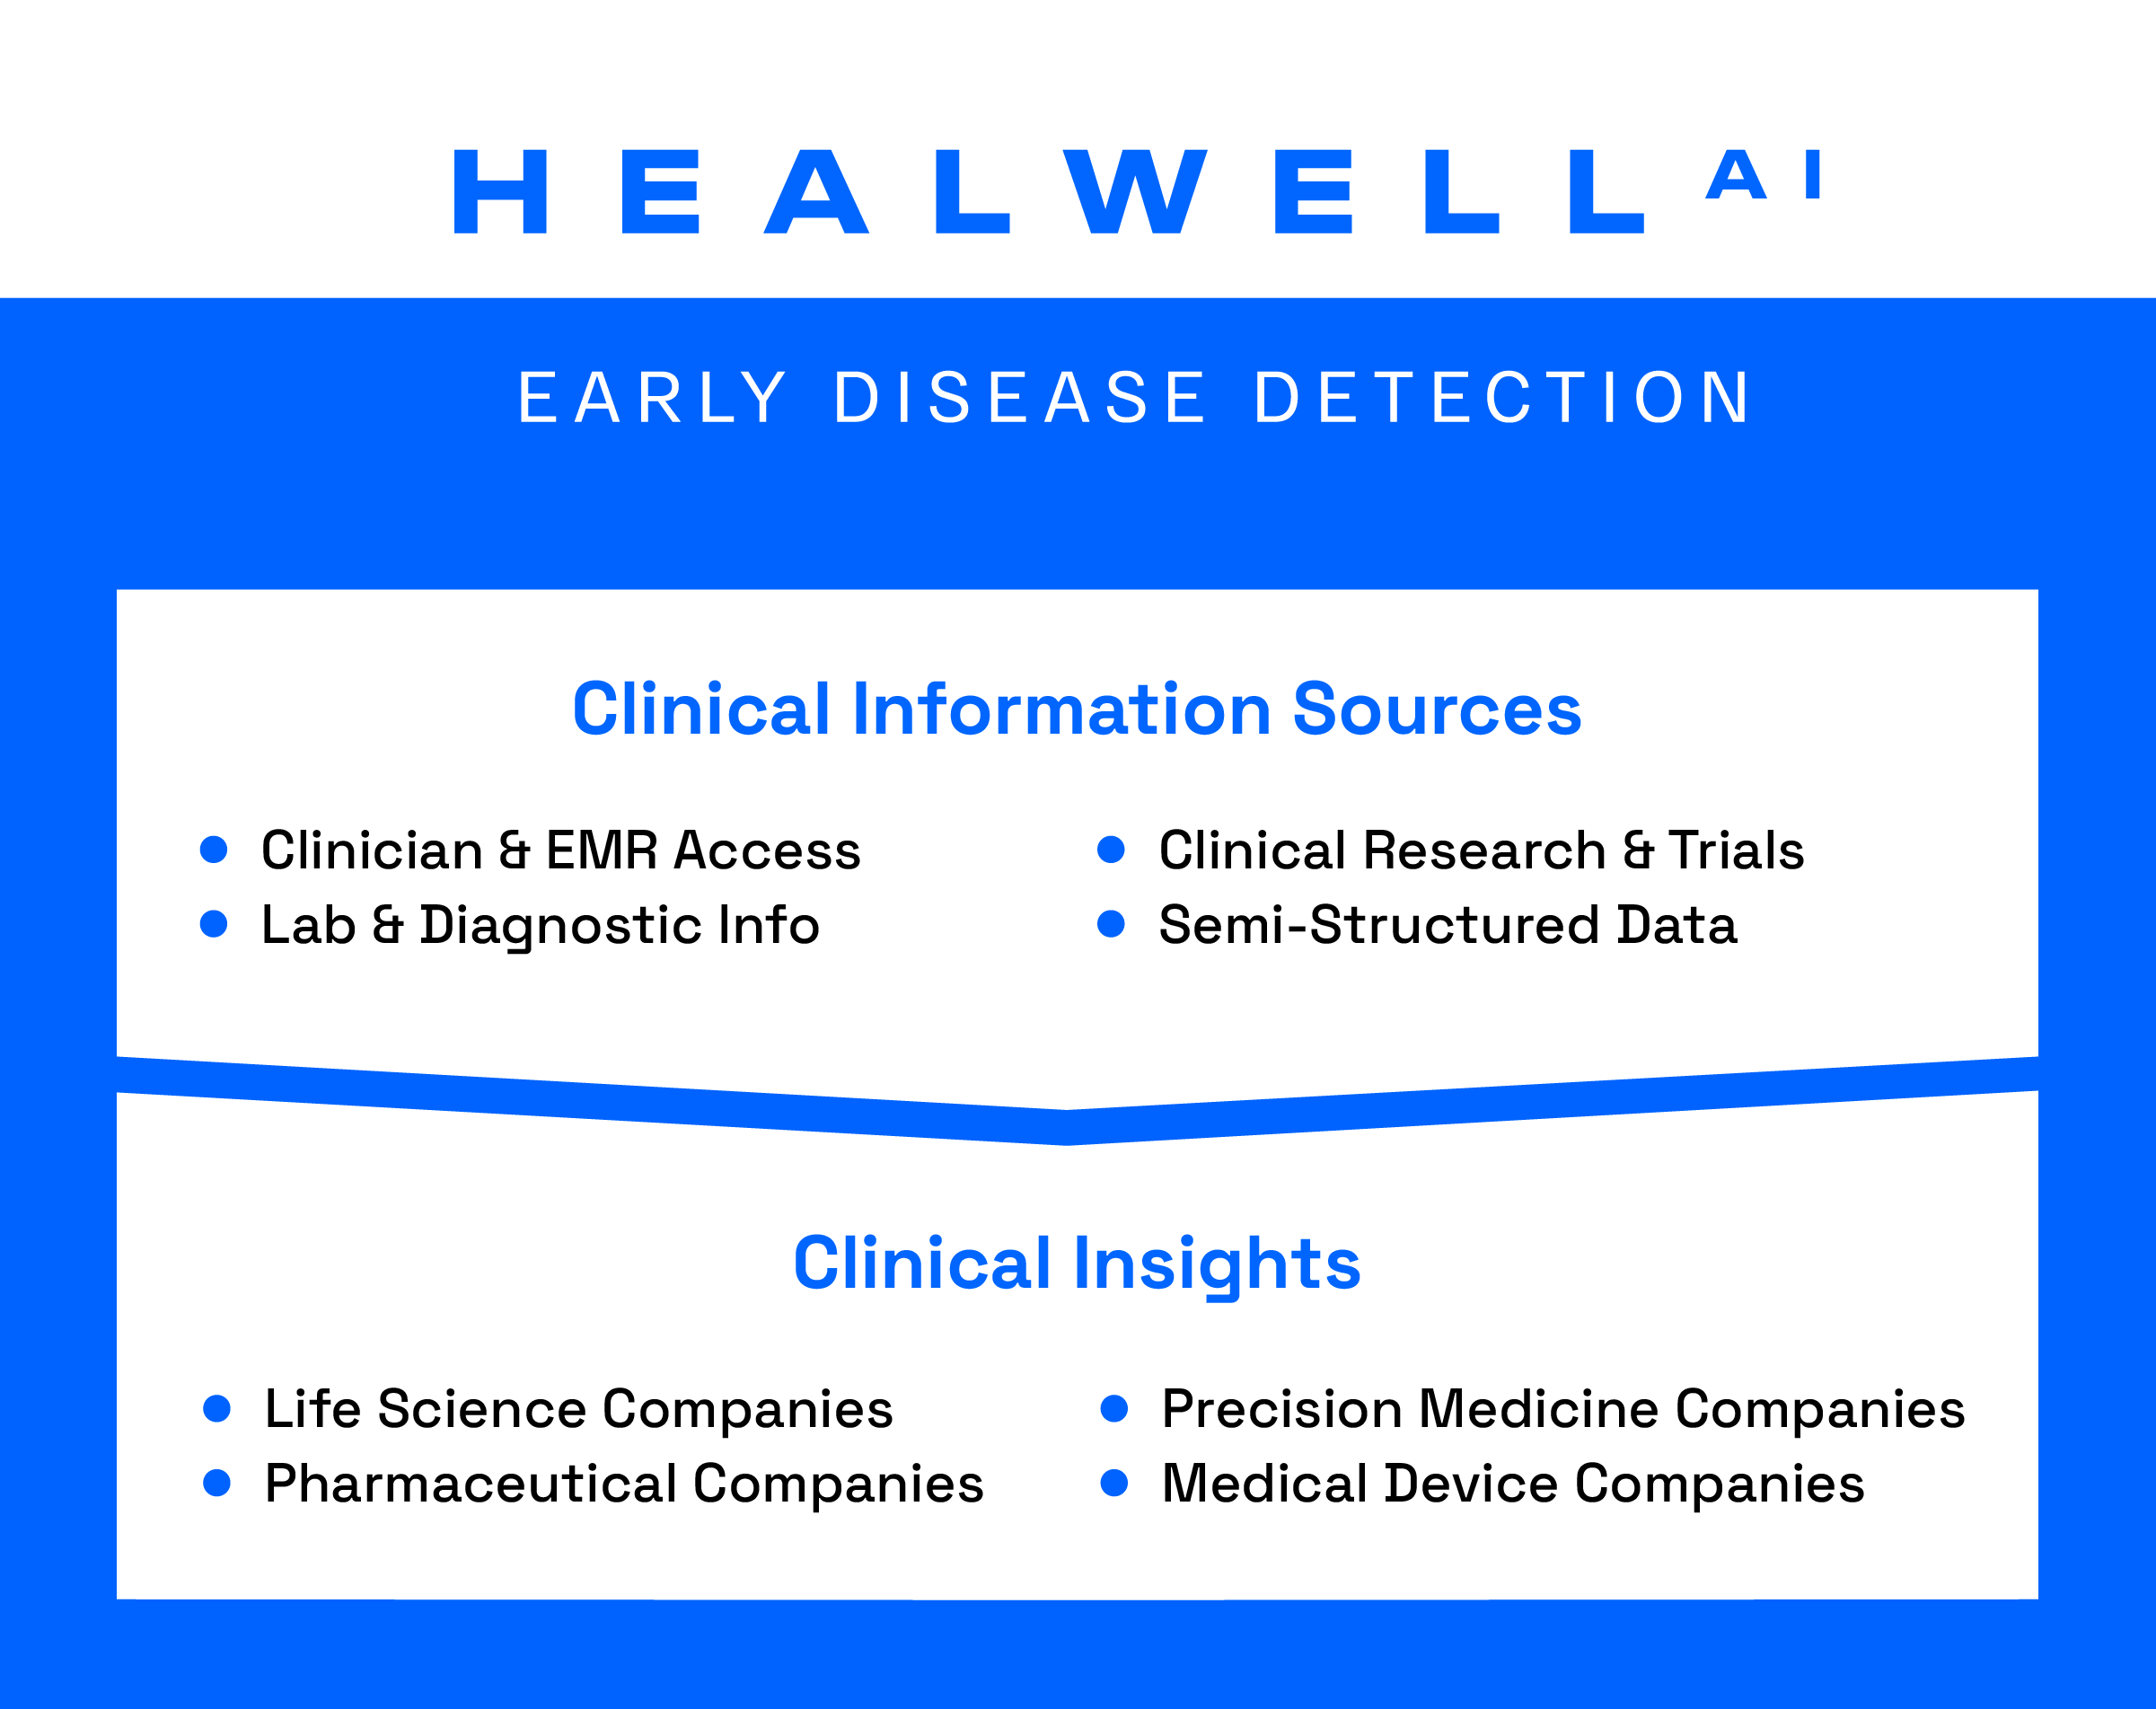 Clinical Information Sources include: Clinician & EMR Access, Lab & Diagnostic Info, Clinical Research & Trials, Semi-Structured data. HEALWELL AI's Clinical Insights serve: Life Science companies, Pharmaceutical companies, Precision Medicine Companies, Medical Device Companies.